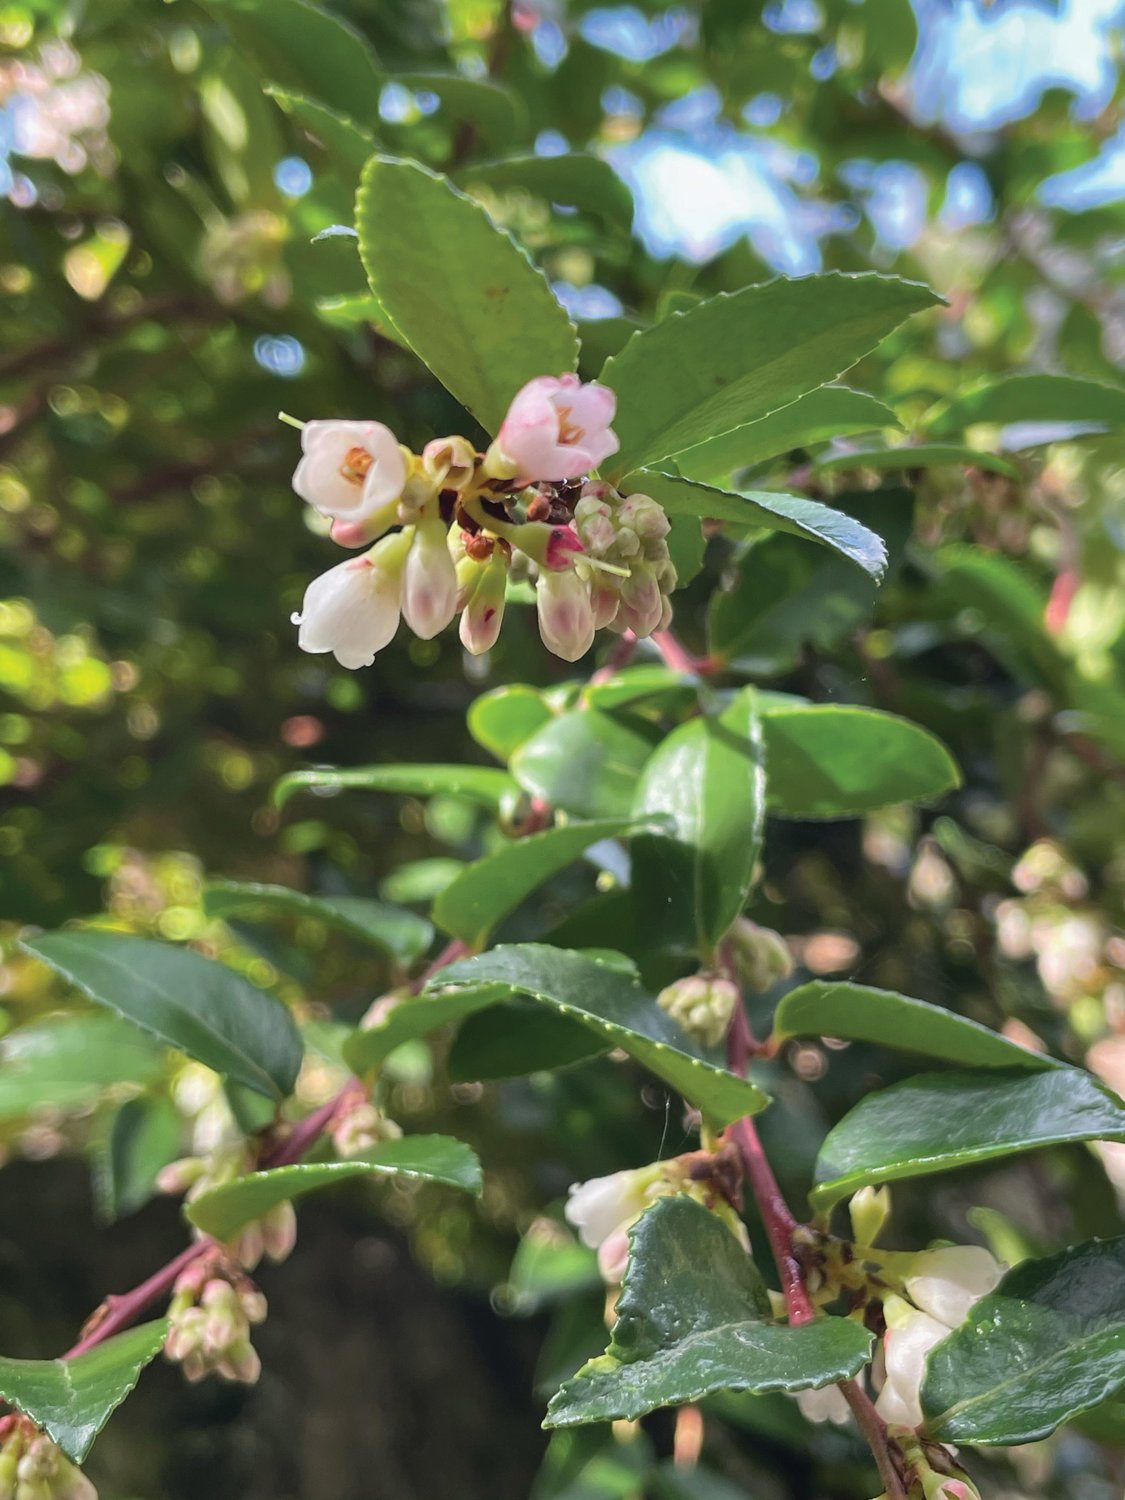 Evergreen Huckleberry flowers are a favorite of native hummingbirds and butterflies.